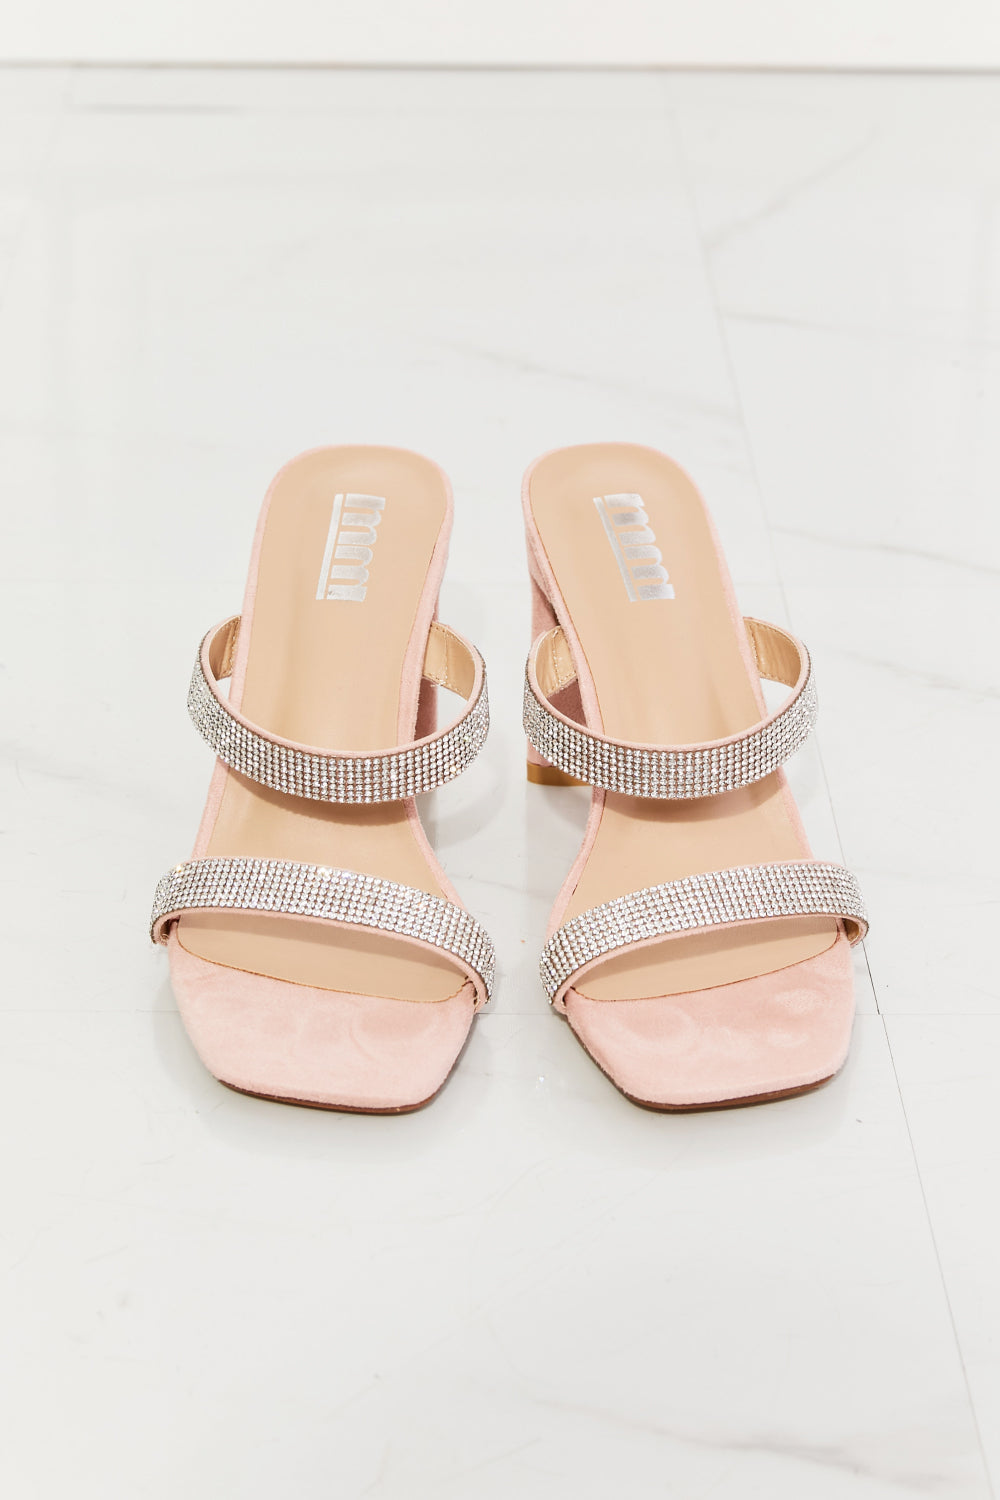 MMShoes Rhinestone Block High Heel Slide On Double Band Sandal in Dusty Pink Rose Leave A Little Sparkle